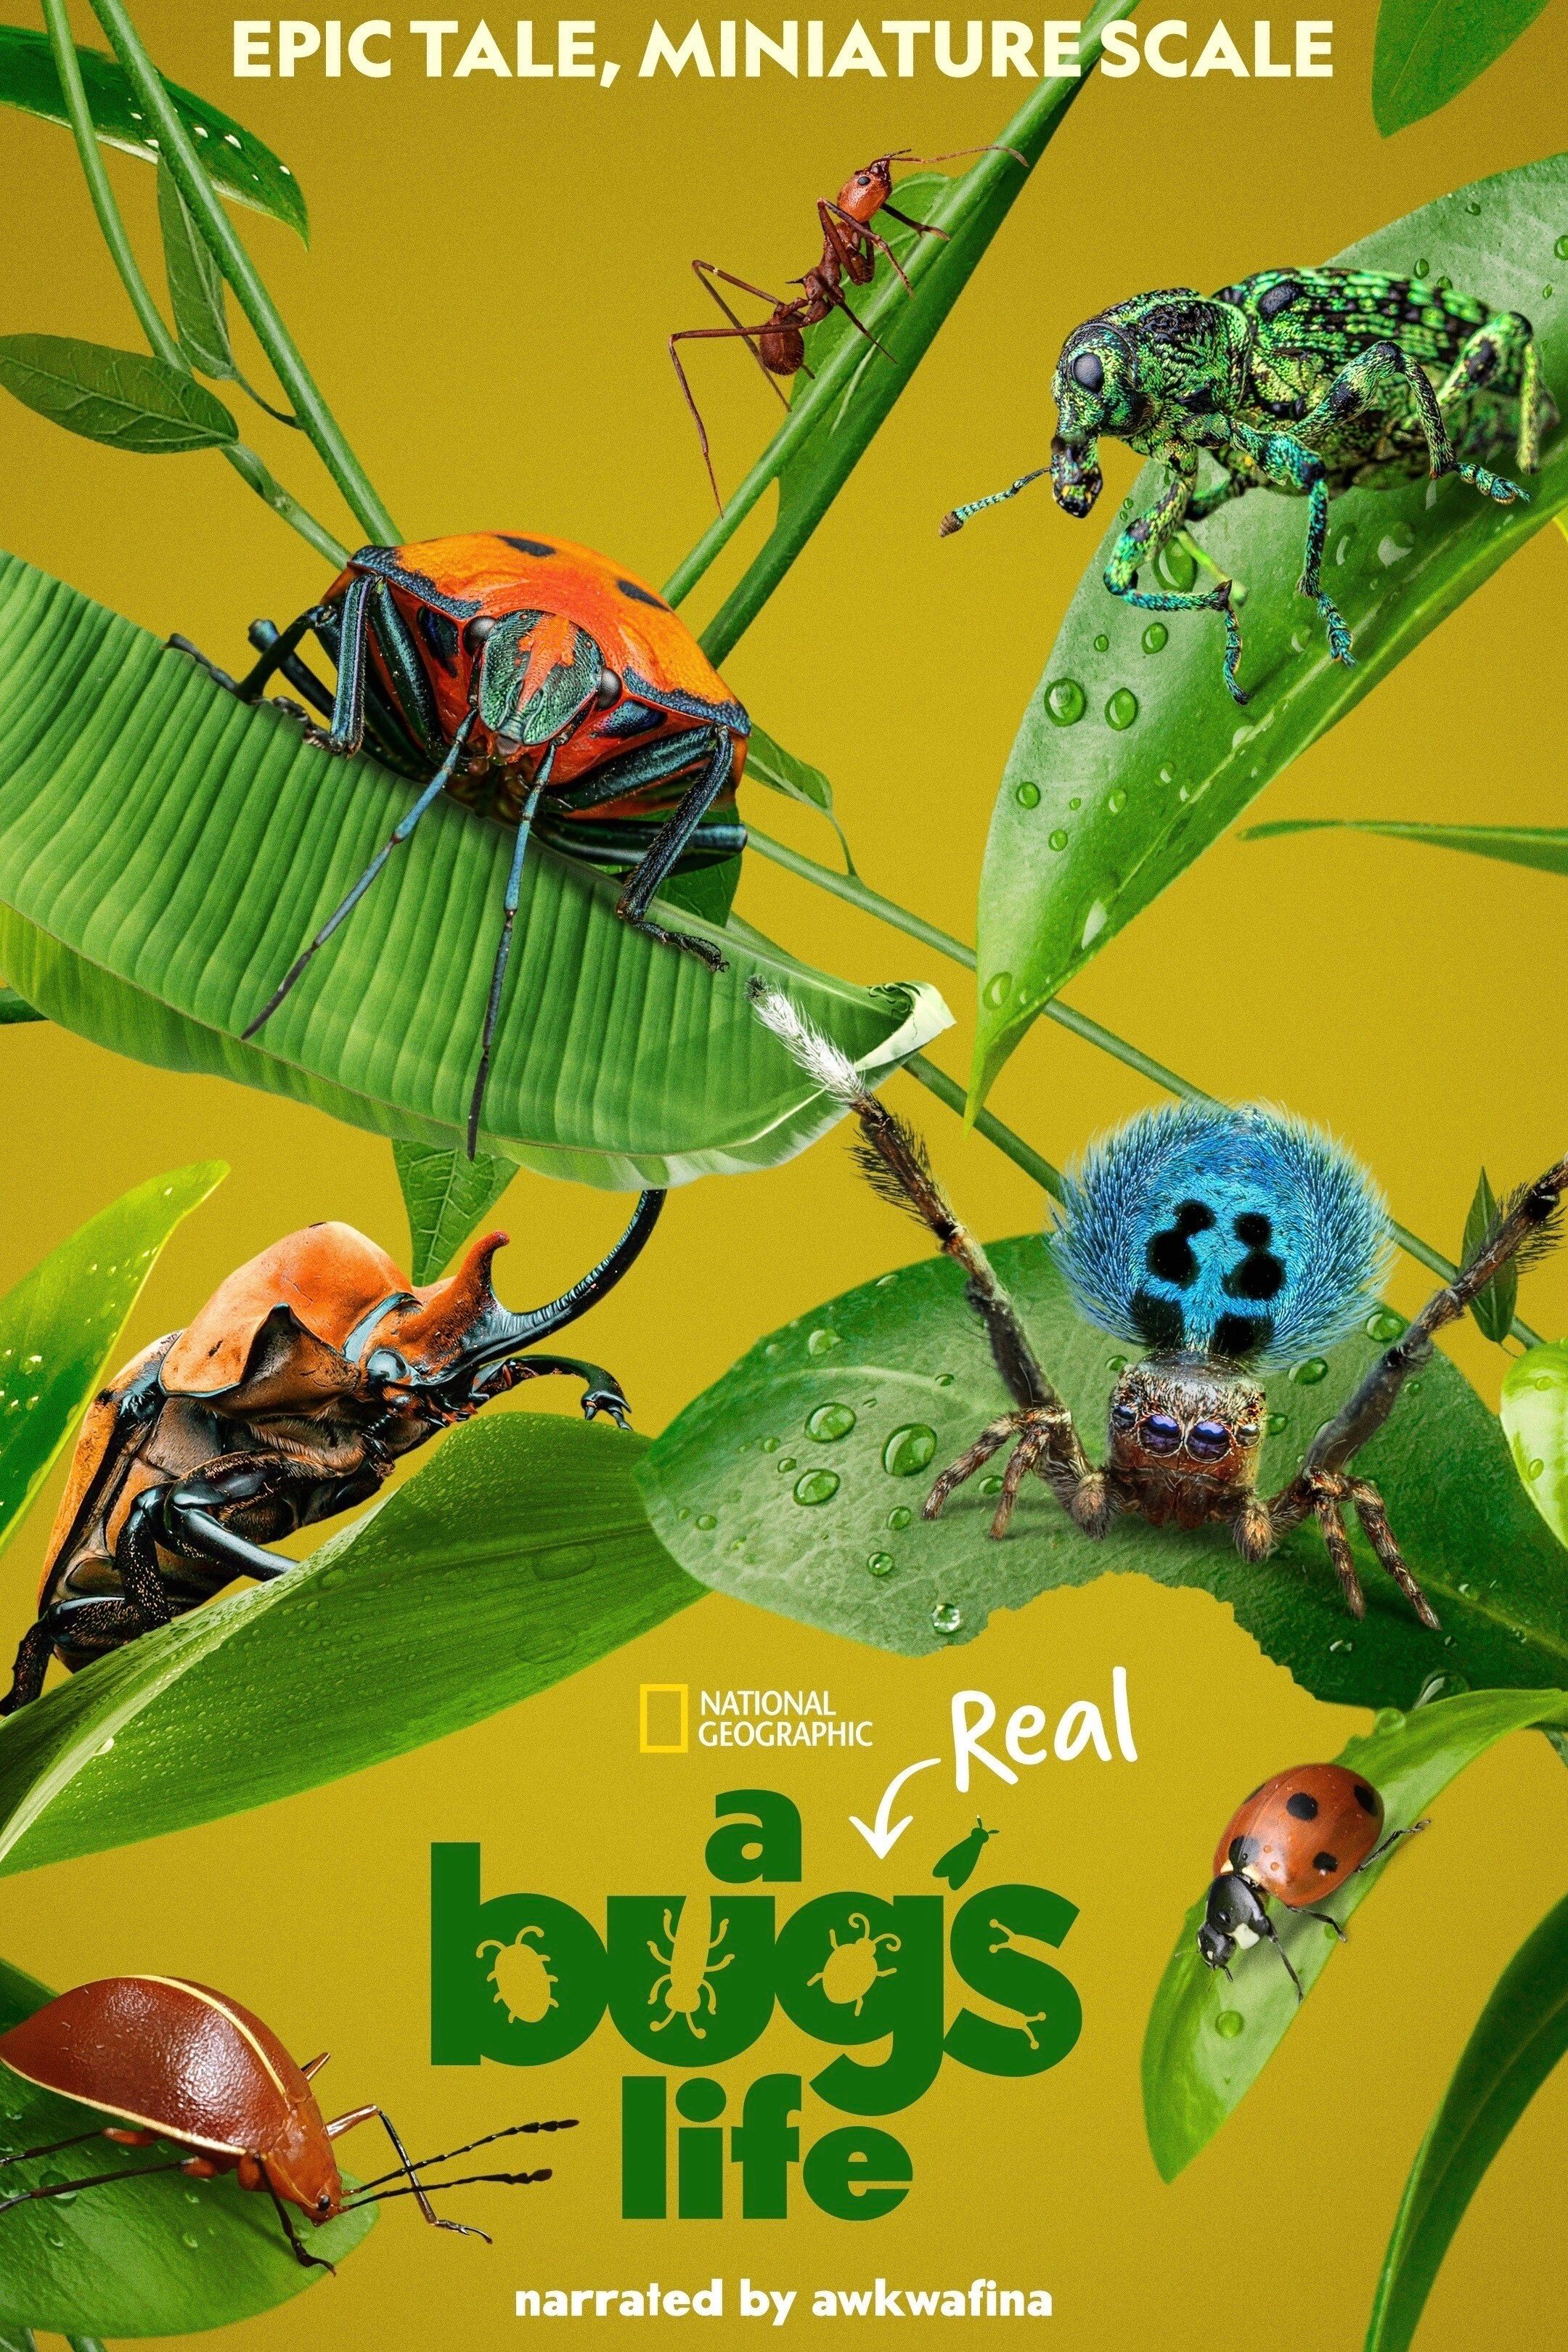 A Real Bug's Life Poster Featuring Bugs Crawling on Leaves